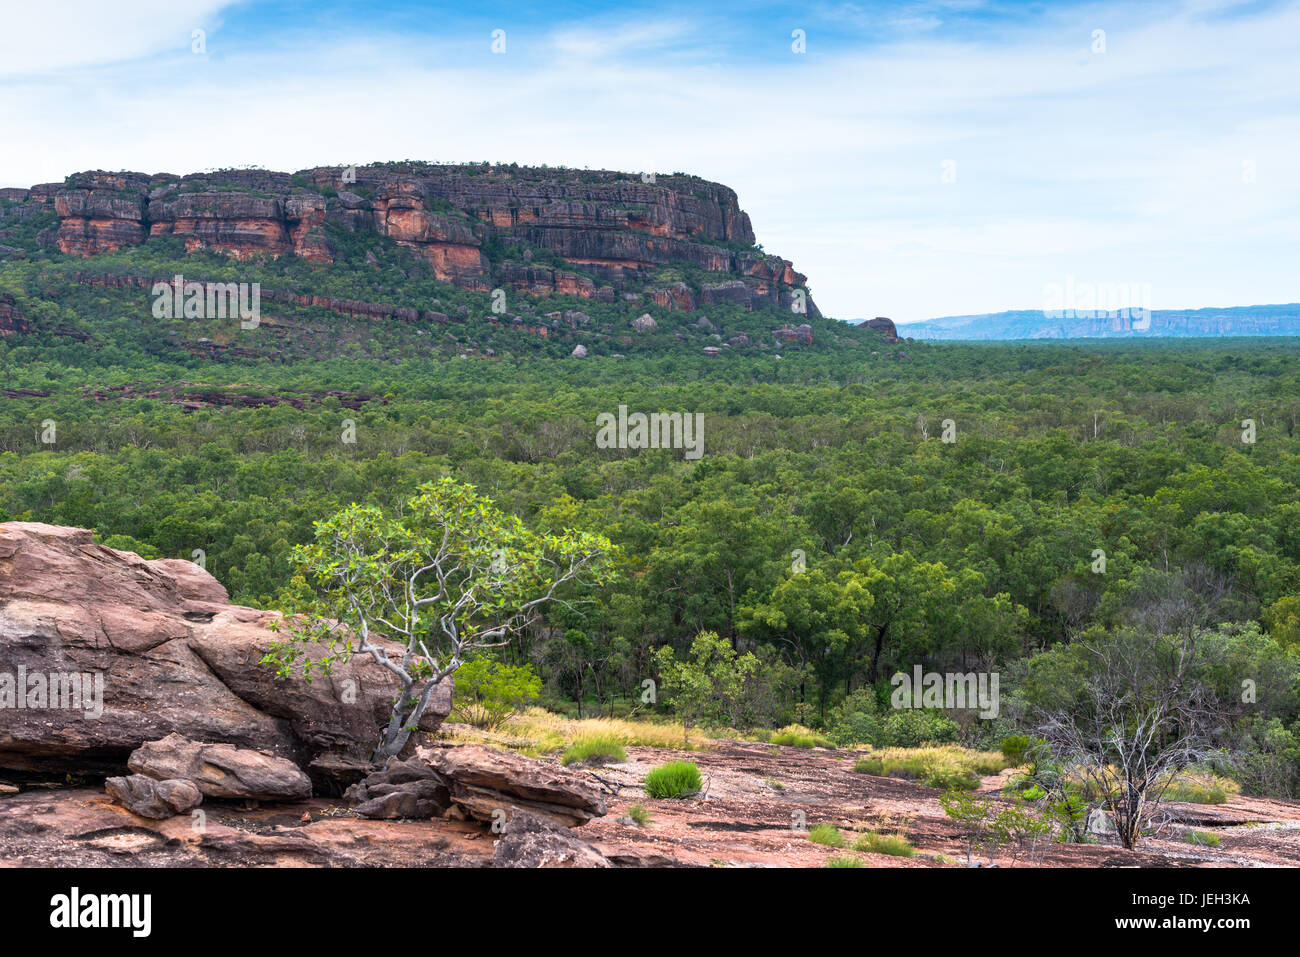 Views from the Nadab lookout, at the sacred Aboriginal site of Ubirr. Kakadu National Park, Northern Territory, Australia Stock Photo